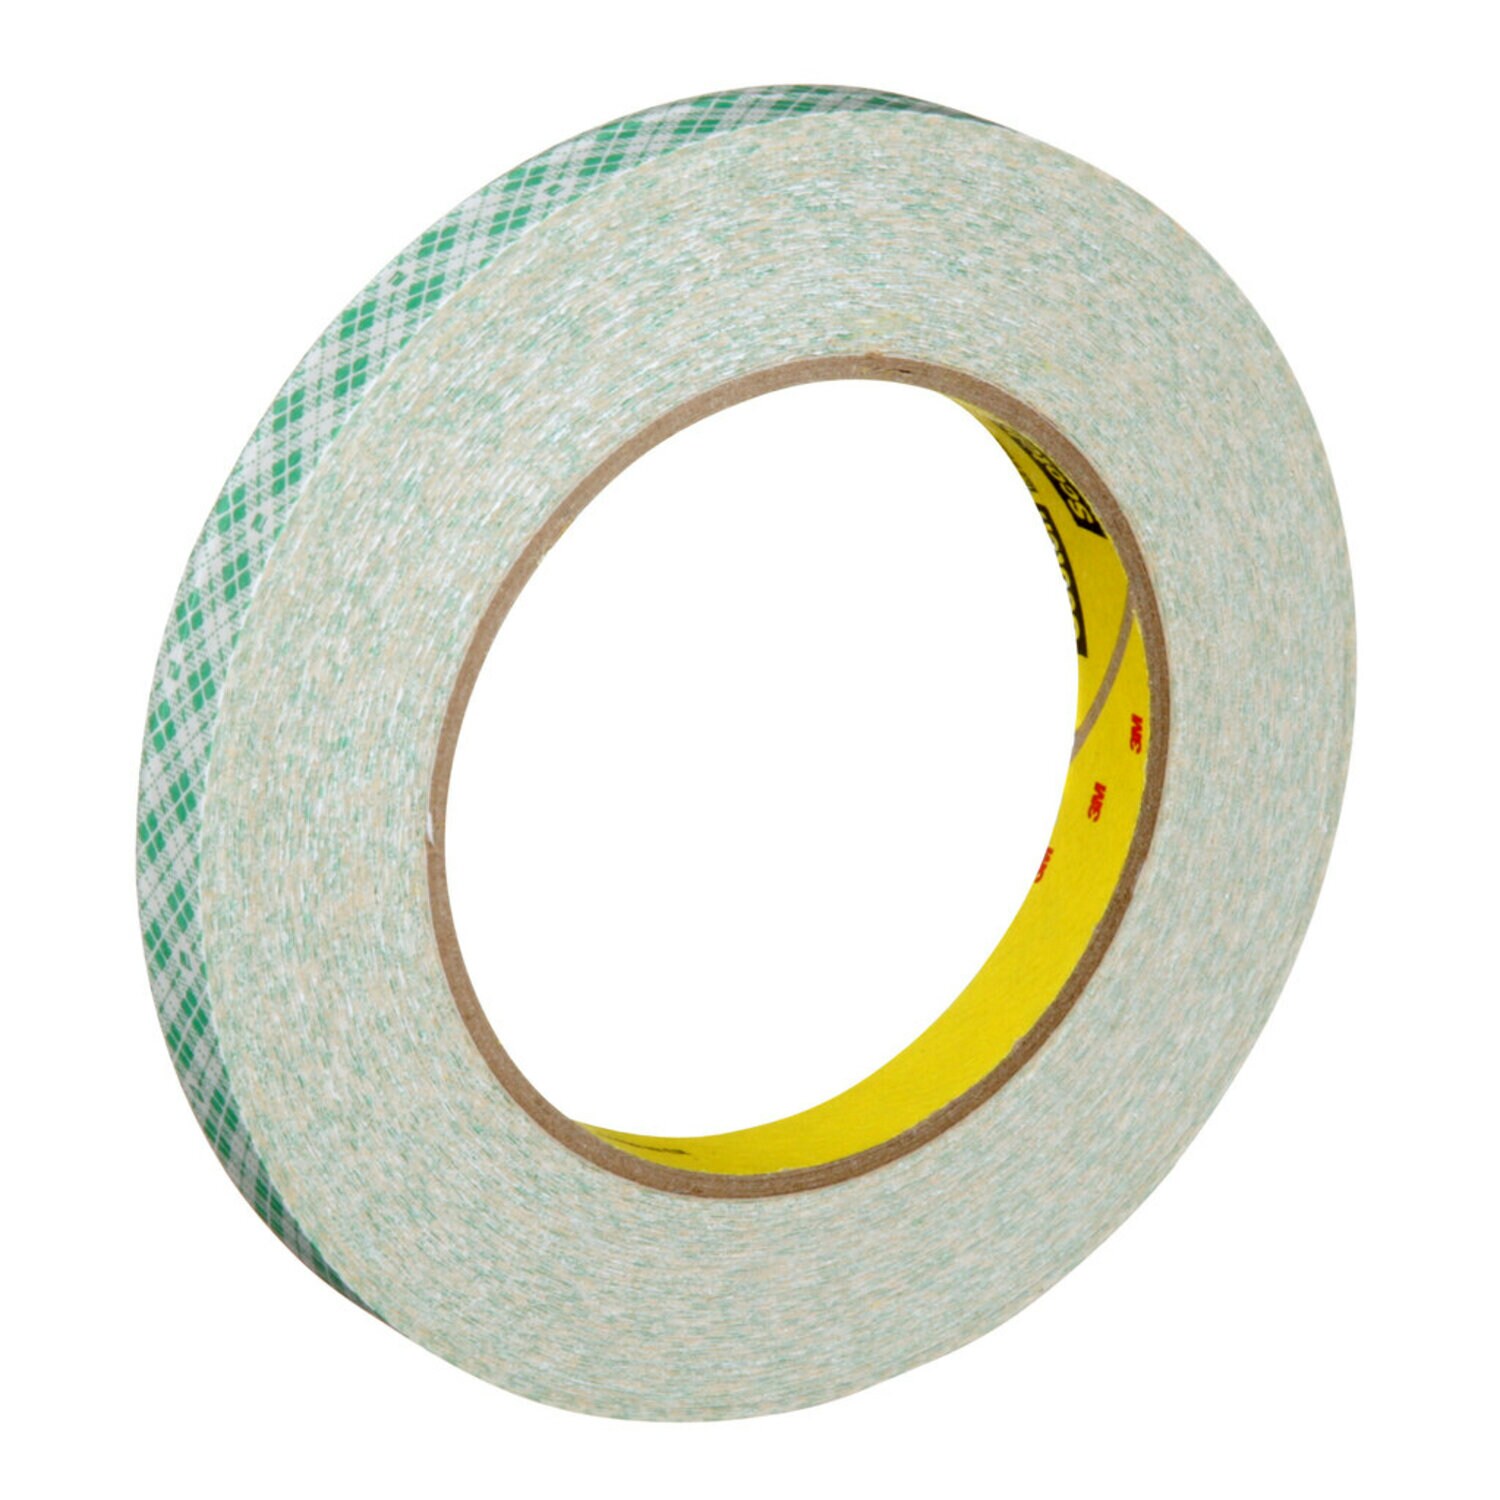 7000049272 - 3M Double Coated Paper Tape 410M, Natural, 1/2 in x 36 yd, 5 mil, 72
rolls per case